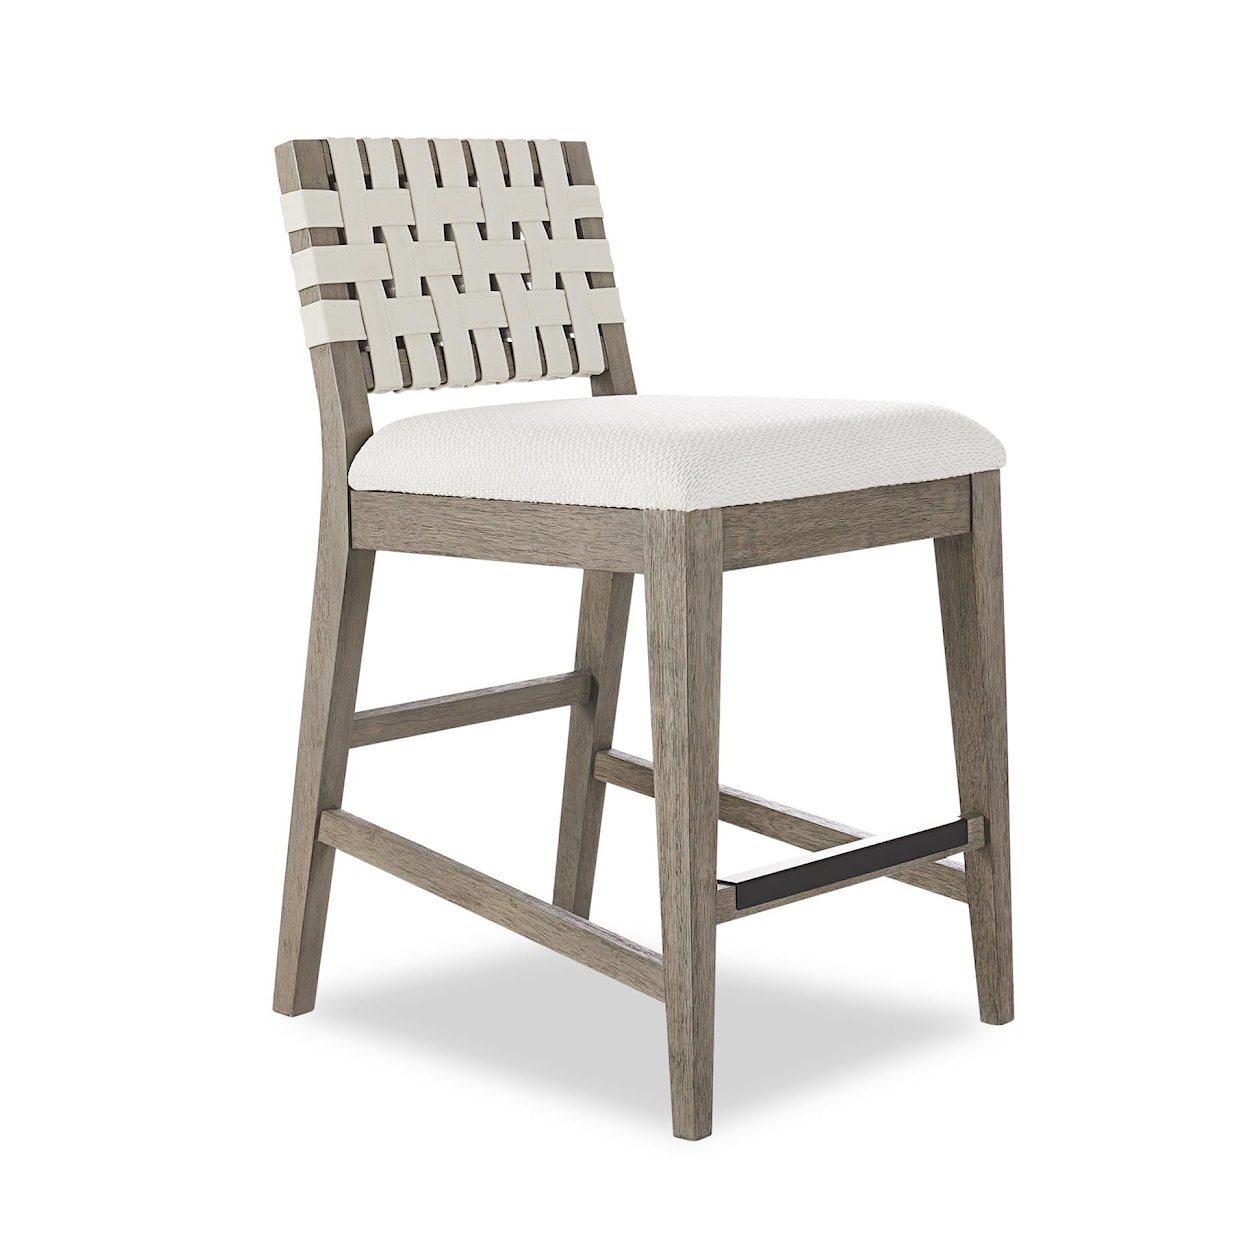 Trisha Yearwood Home Collection by Legacy Classic Staycation Woven Counter Height Stool